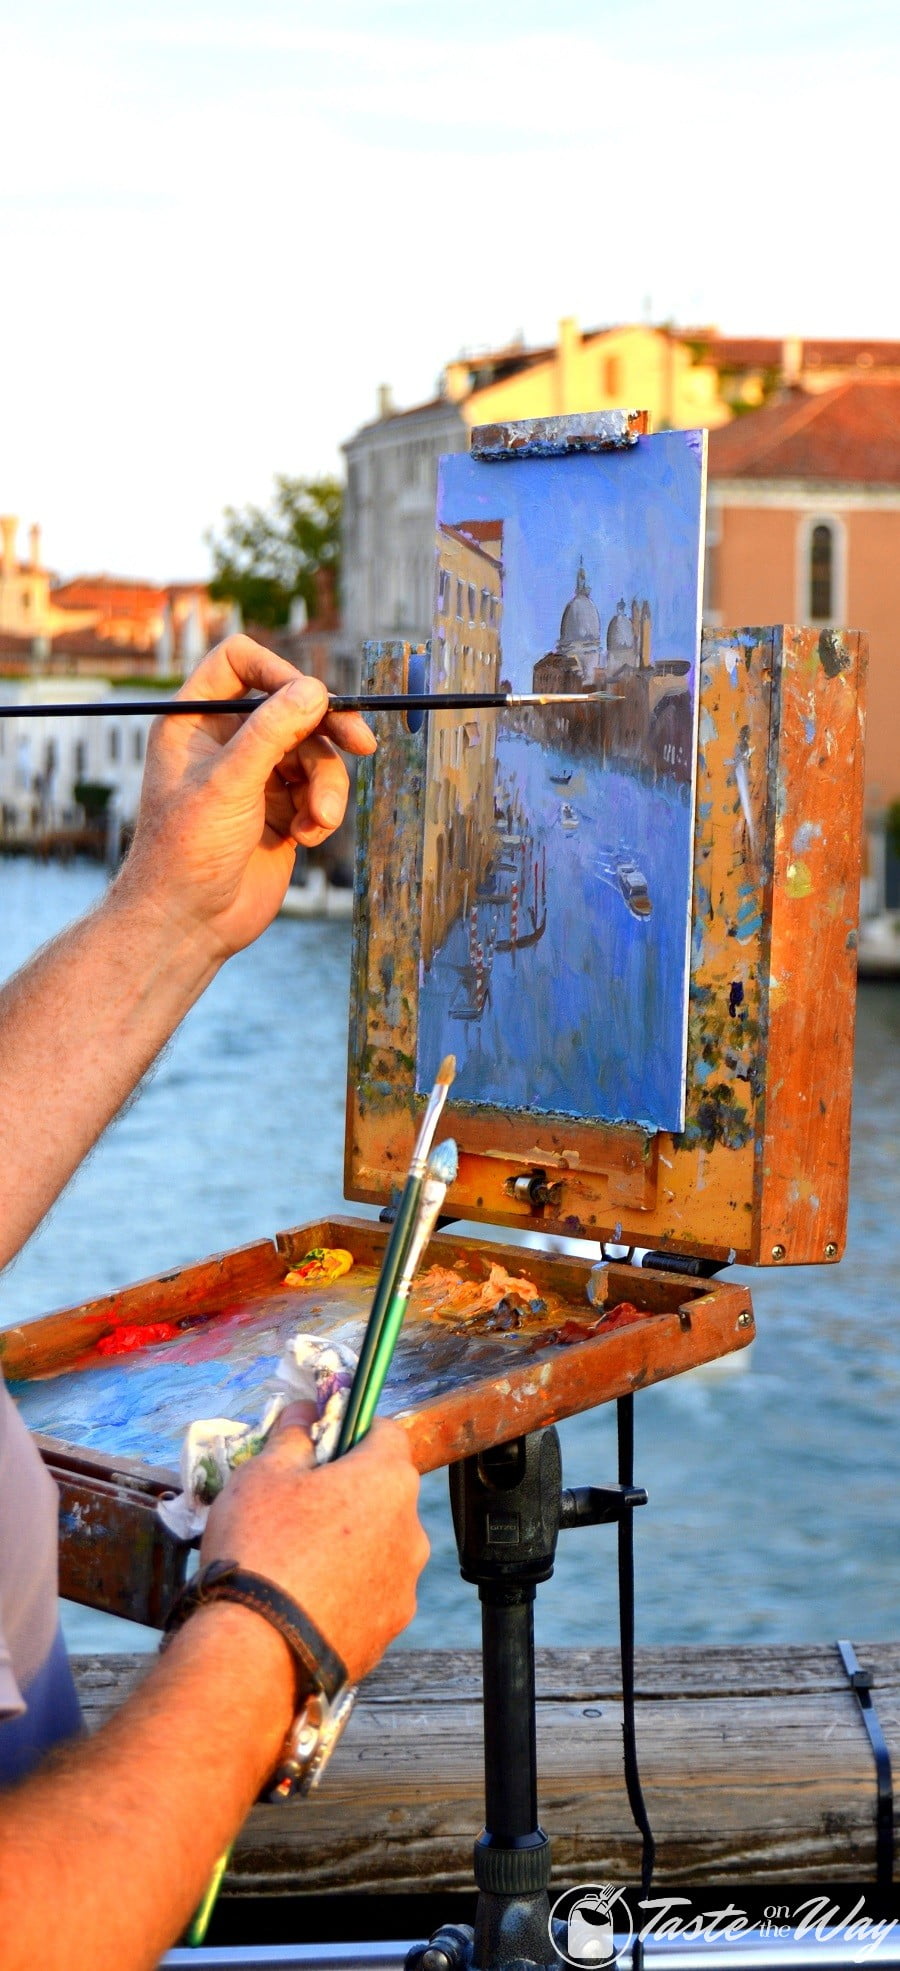 One of the top 10 fun #ThingsToDo in #Venice, #Italy is to enjoy the works of street artists. Check out for more! #travel #photography @tasteontheway